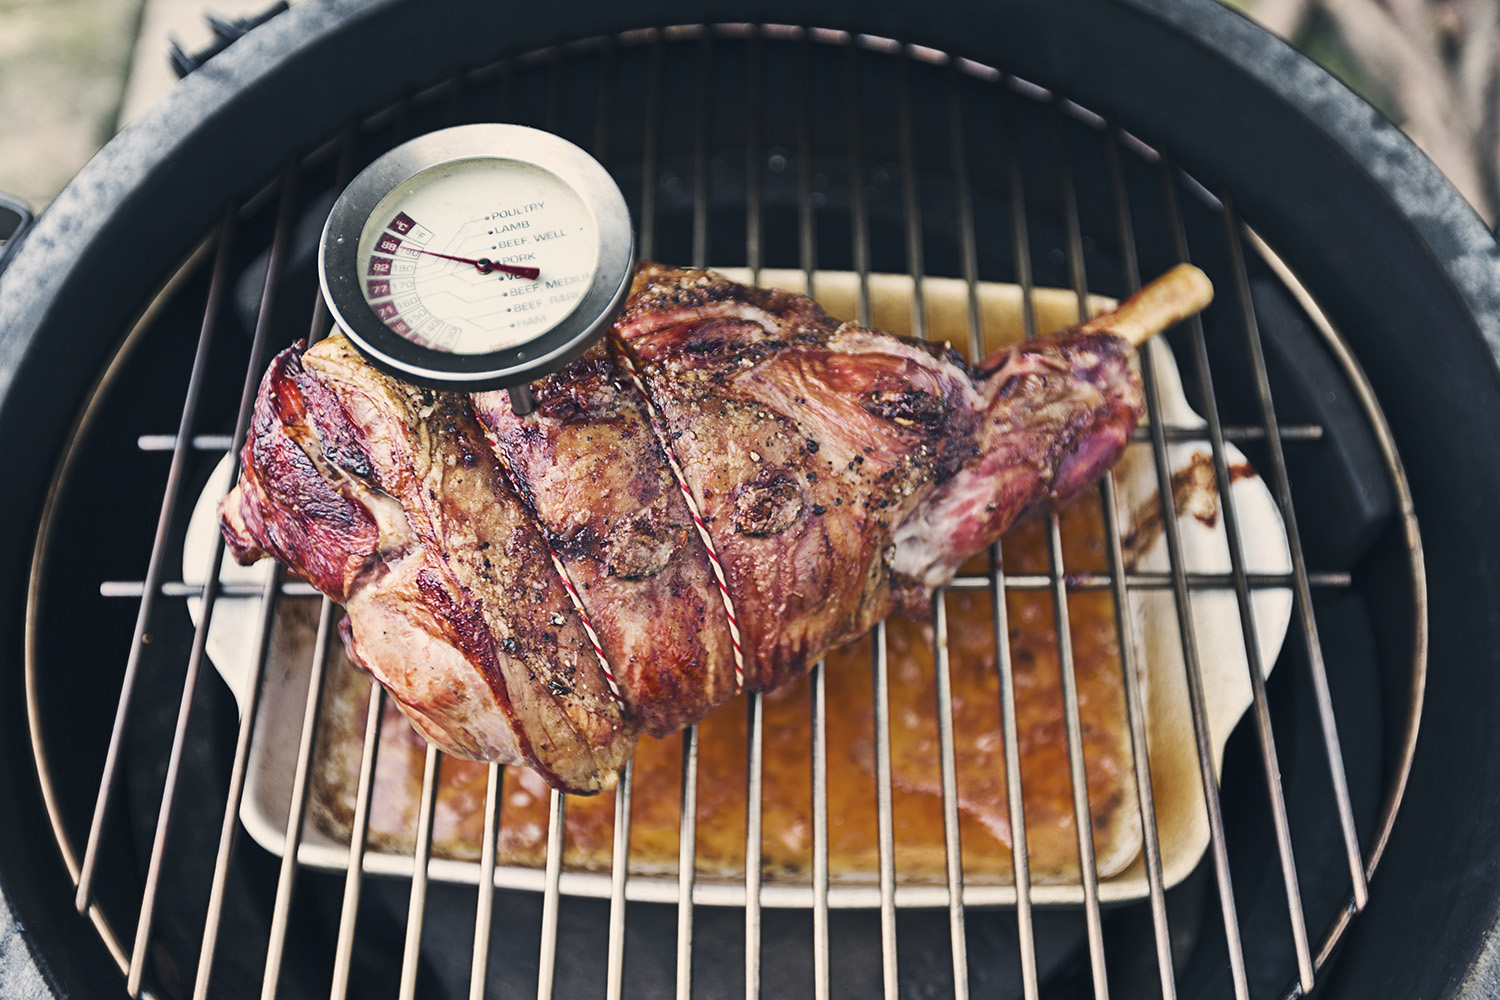 https://www.themanual.com/wp-content/uploads/sites/9/2019/01/barbecue-grill-lamb-meat-thermometer.jpg?p=1